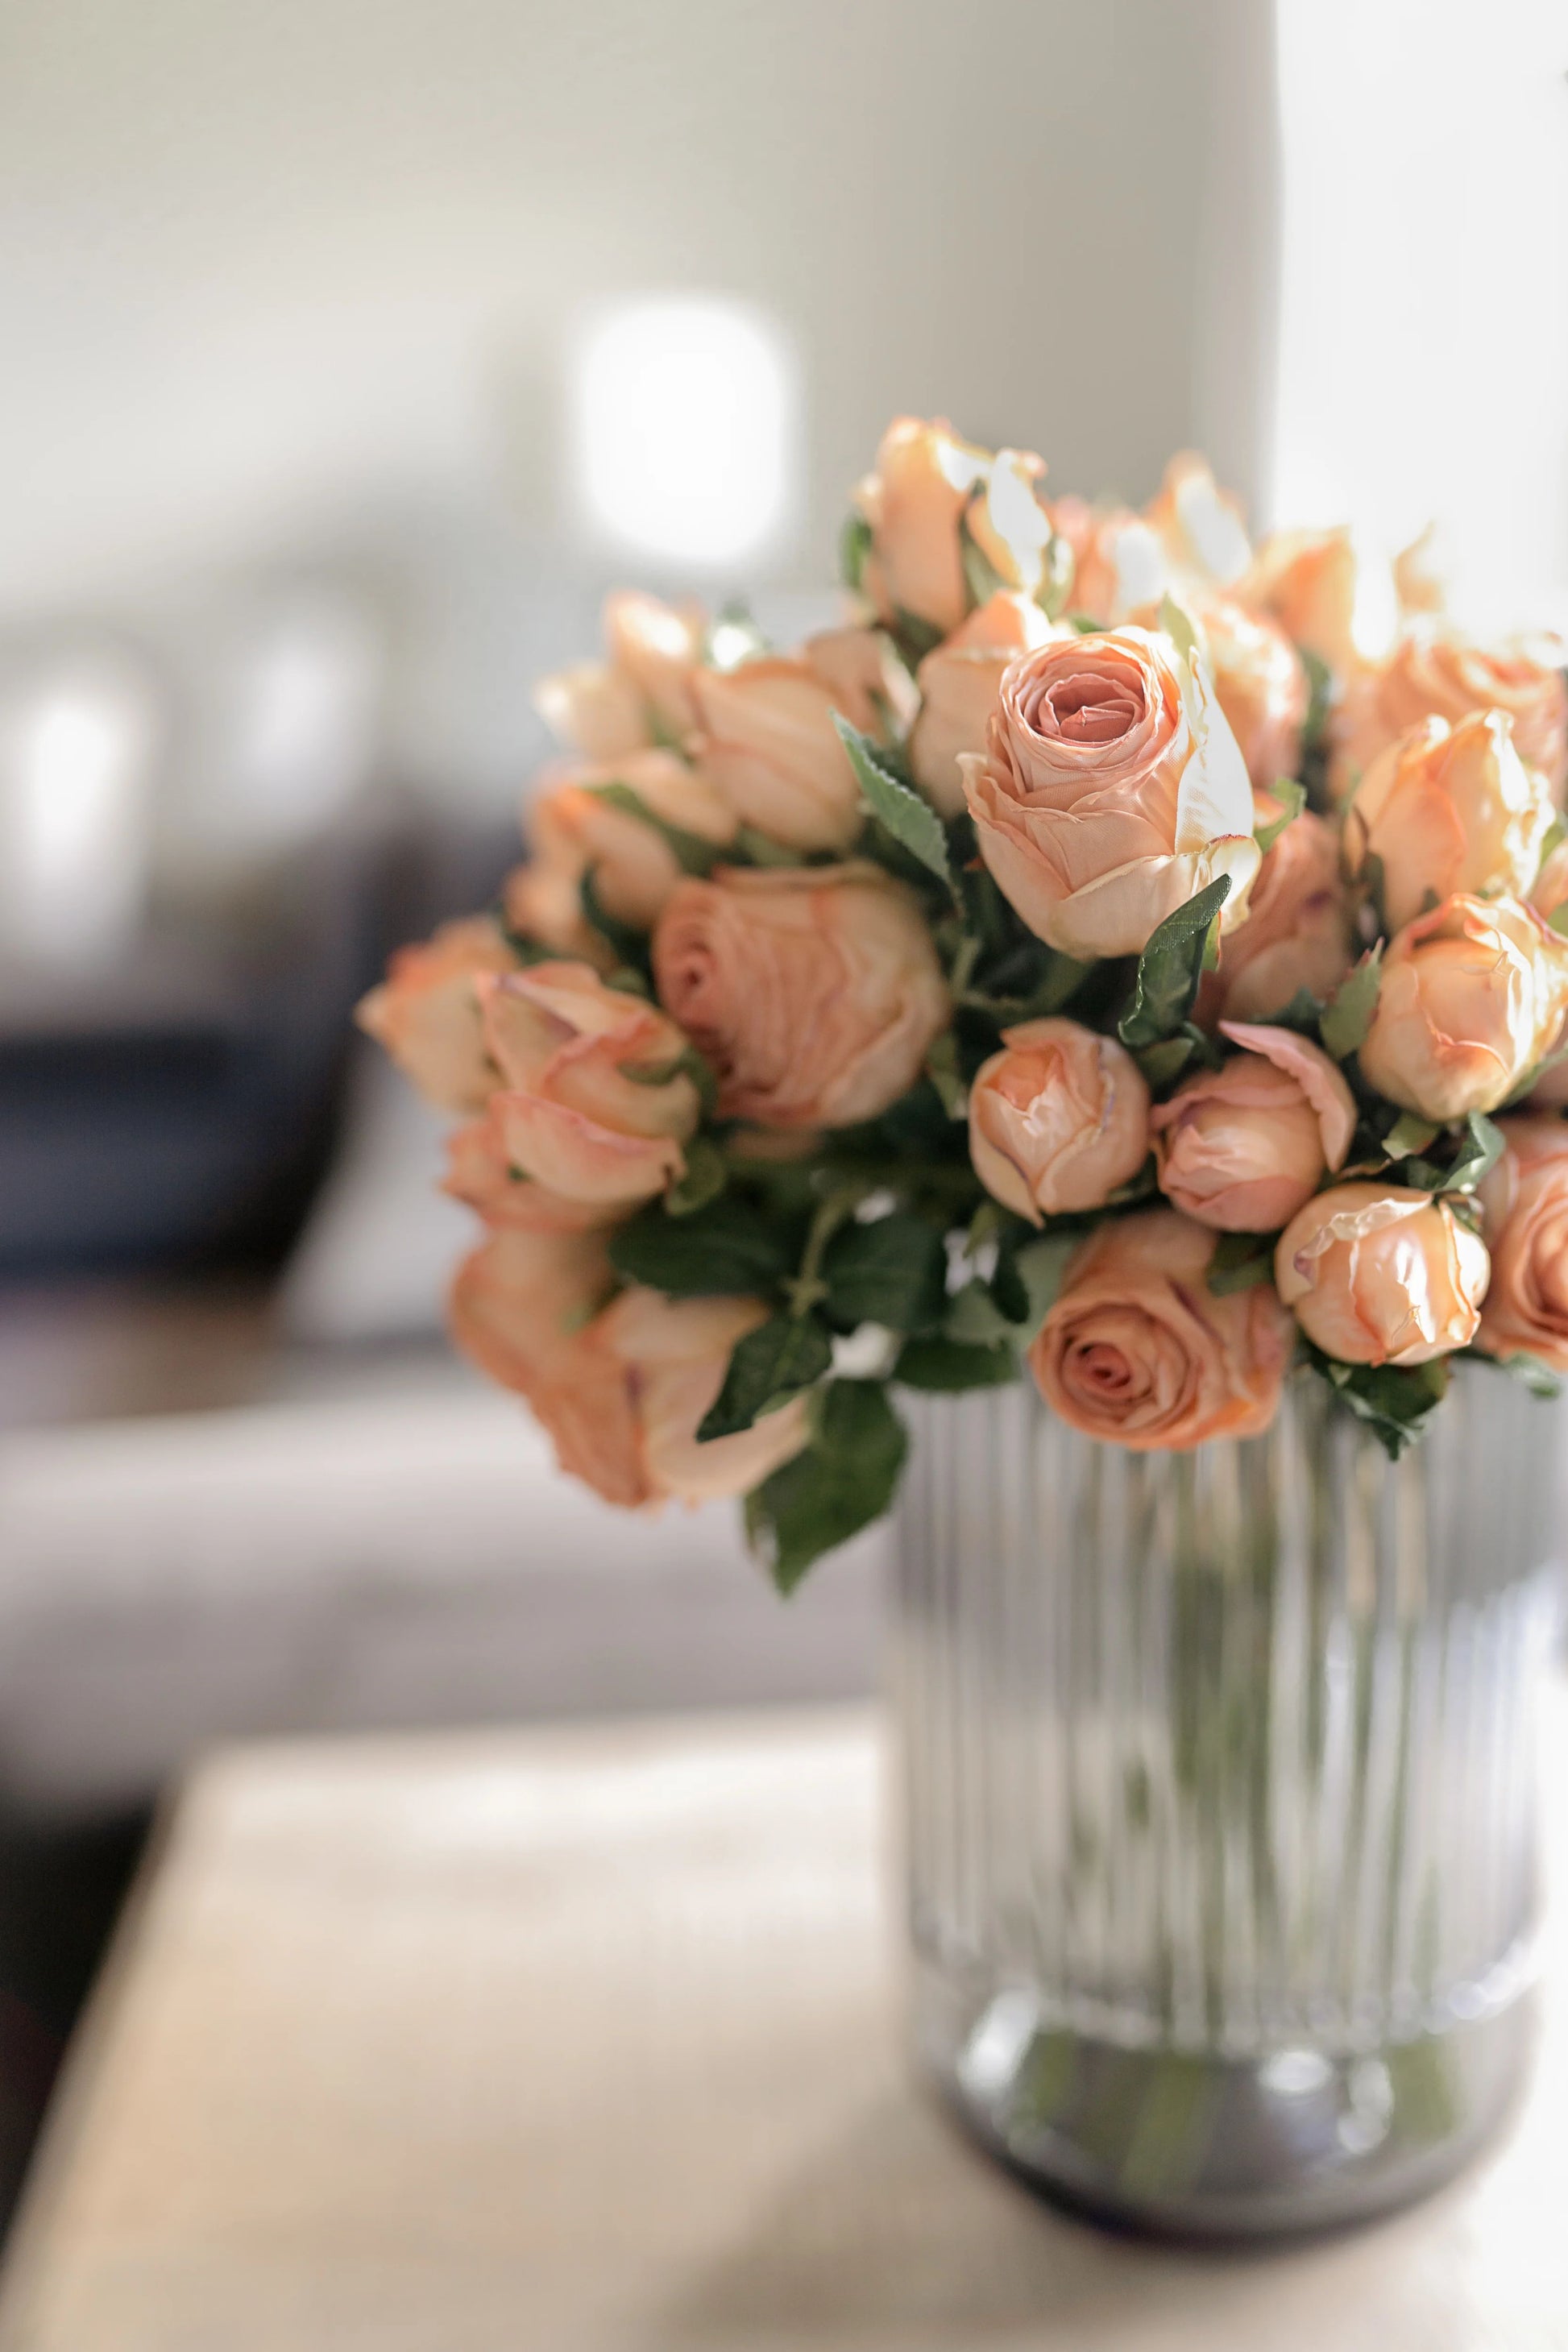 Close up image of a bouquet of blush pink artificial roses crafted to look like preserved roses. The roses have a pink color with light brown edging to give the appearance of being dried. Each stem is 14 inches tall and features two lifelike flower heads with green leaves. The bouquet is showcased against a neutral beige background and displayed in a smokey gray fluted vase, creating a beautiful and realistic centerpiece for any room.